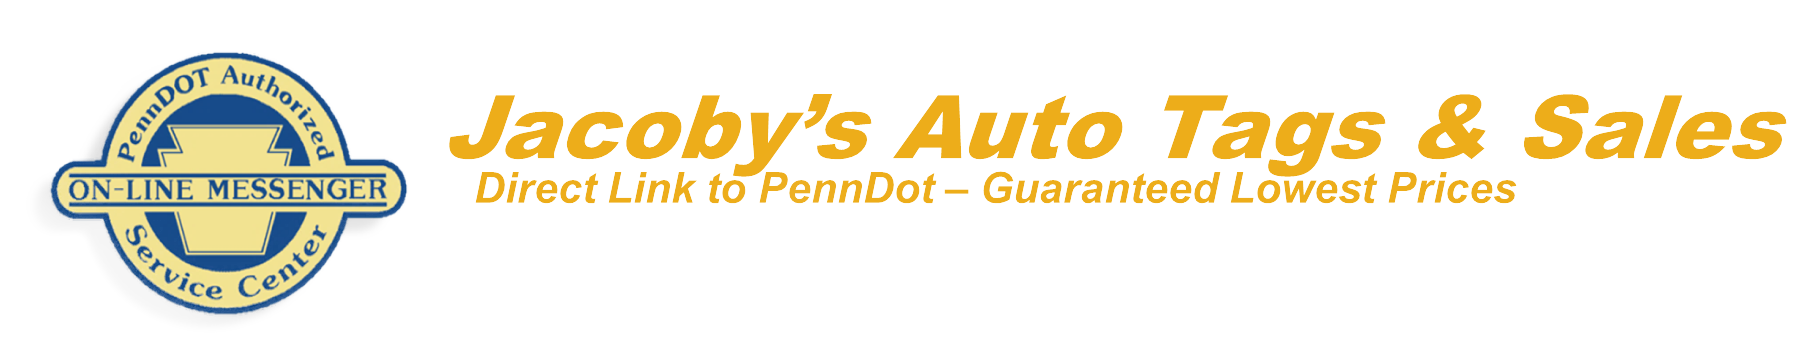 A yellow and white logo for tony 's auto shop.